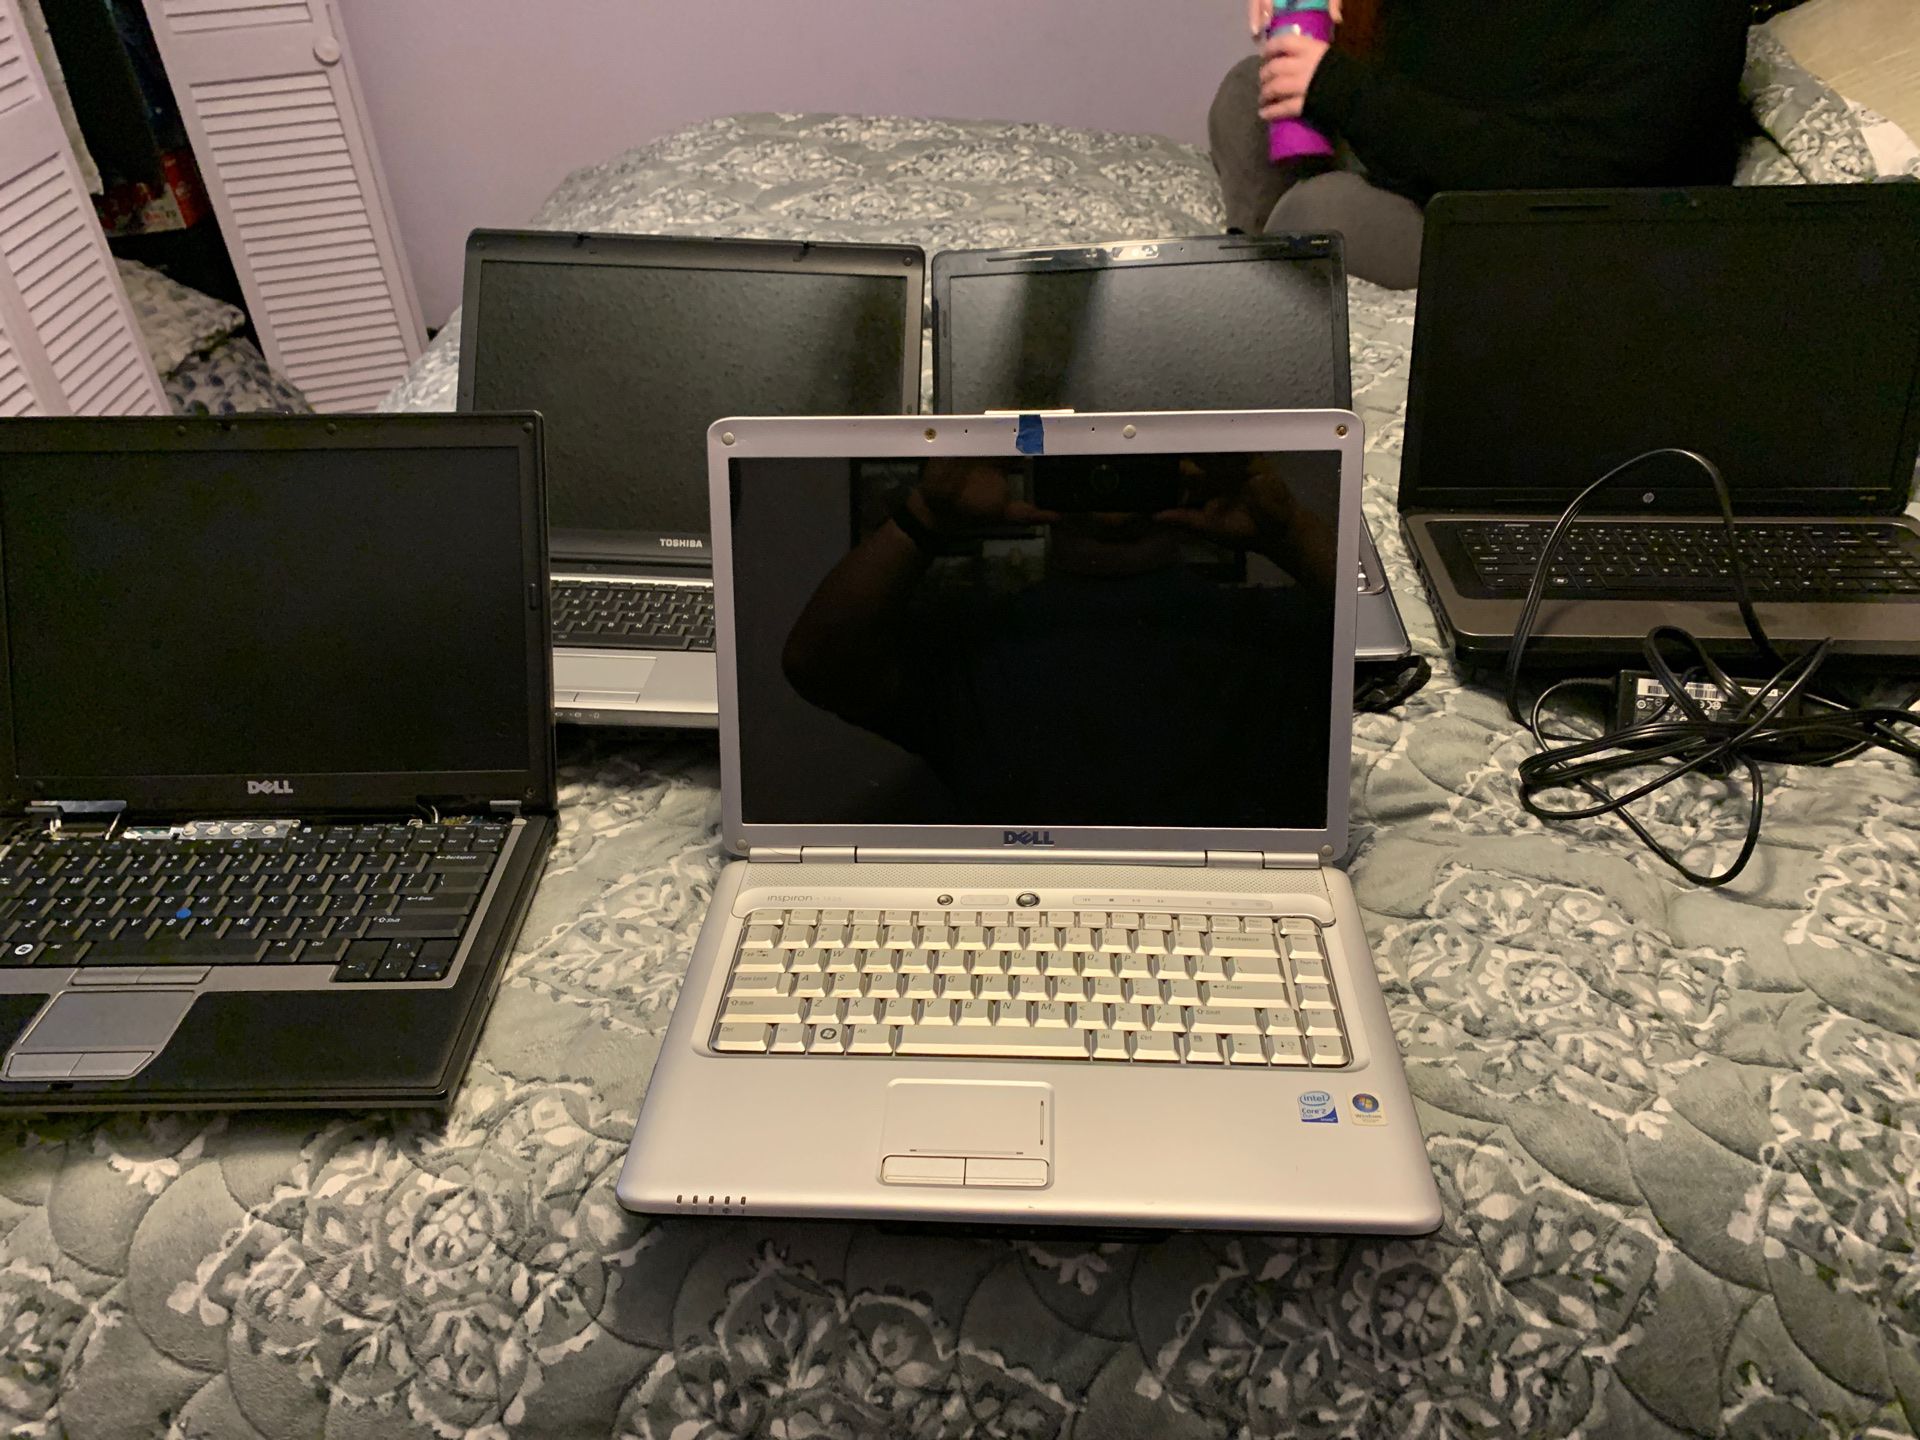 5 Laptops for parts